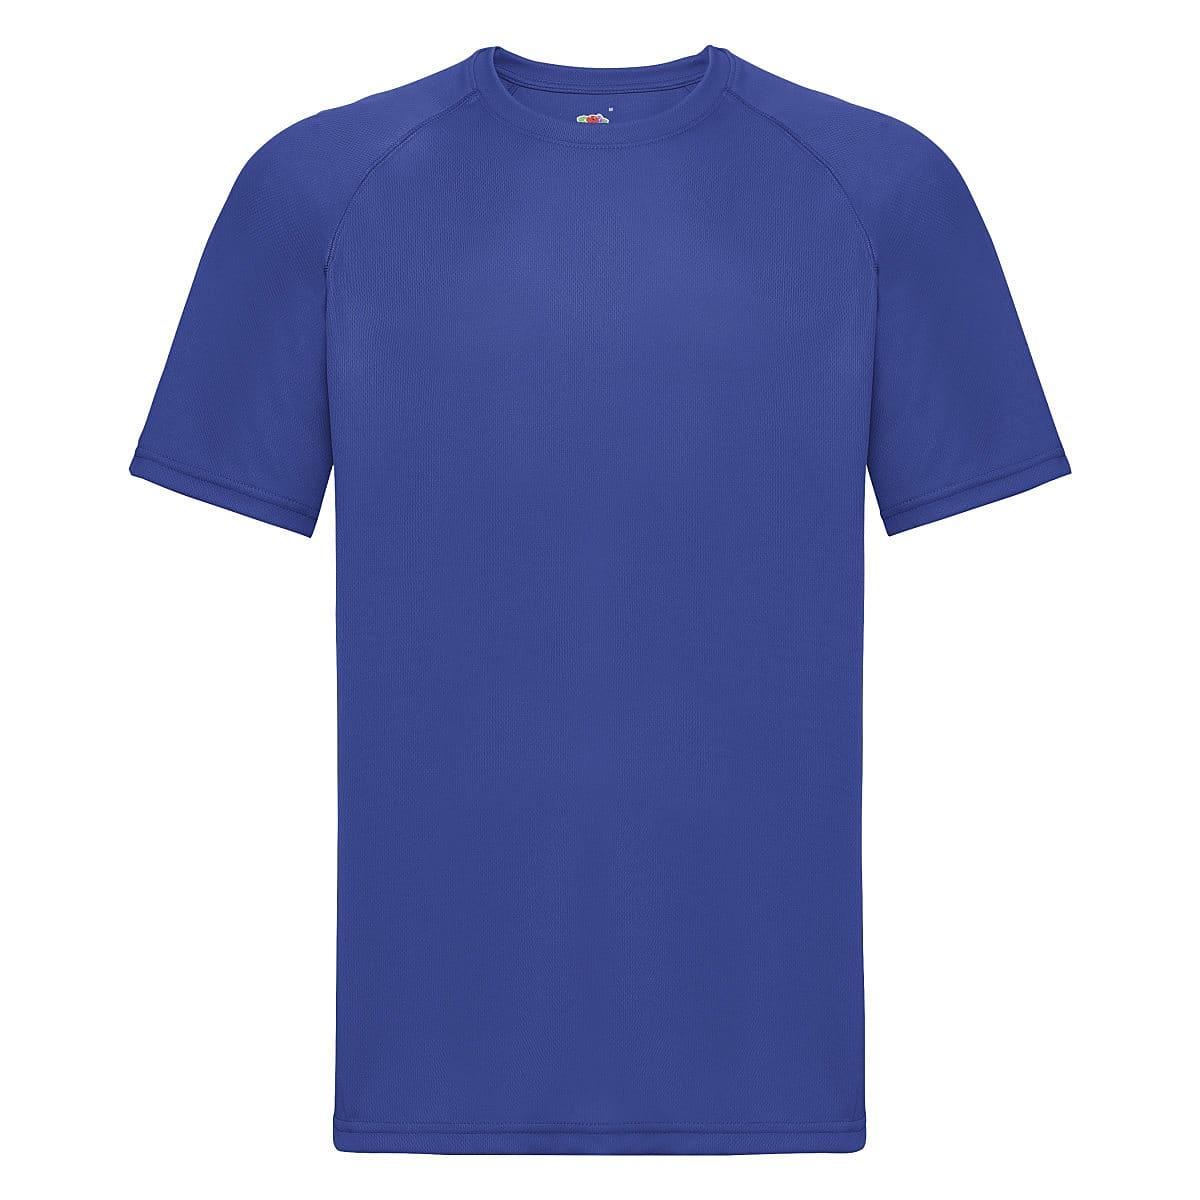 Fruit Of The Loom Mens Performance T-Shirt in Royal Blue (Product Code: 61390)